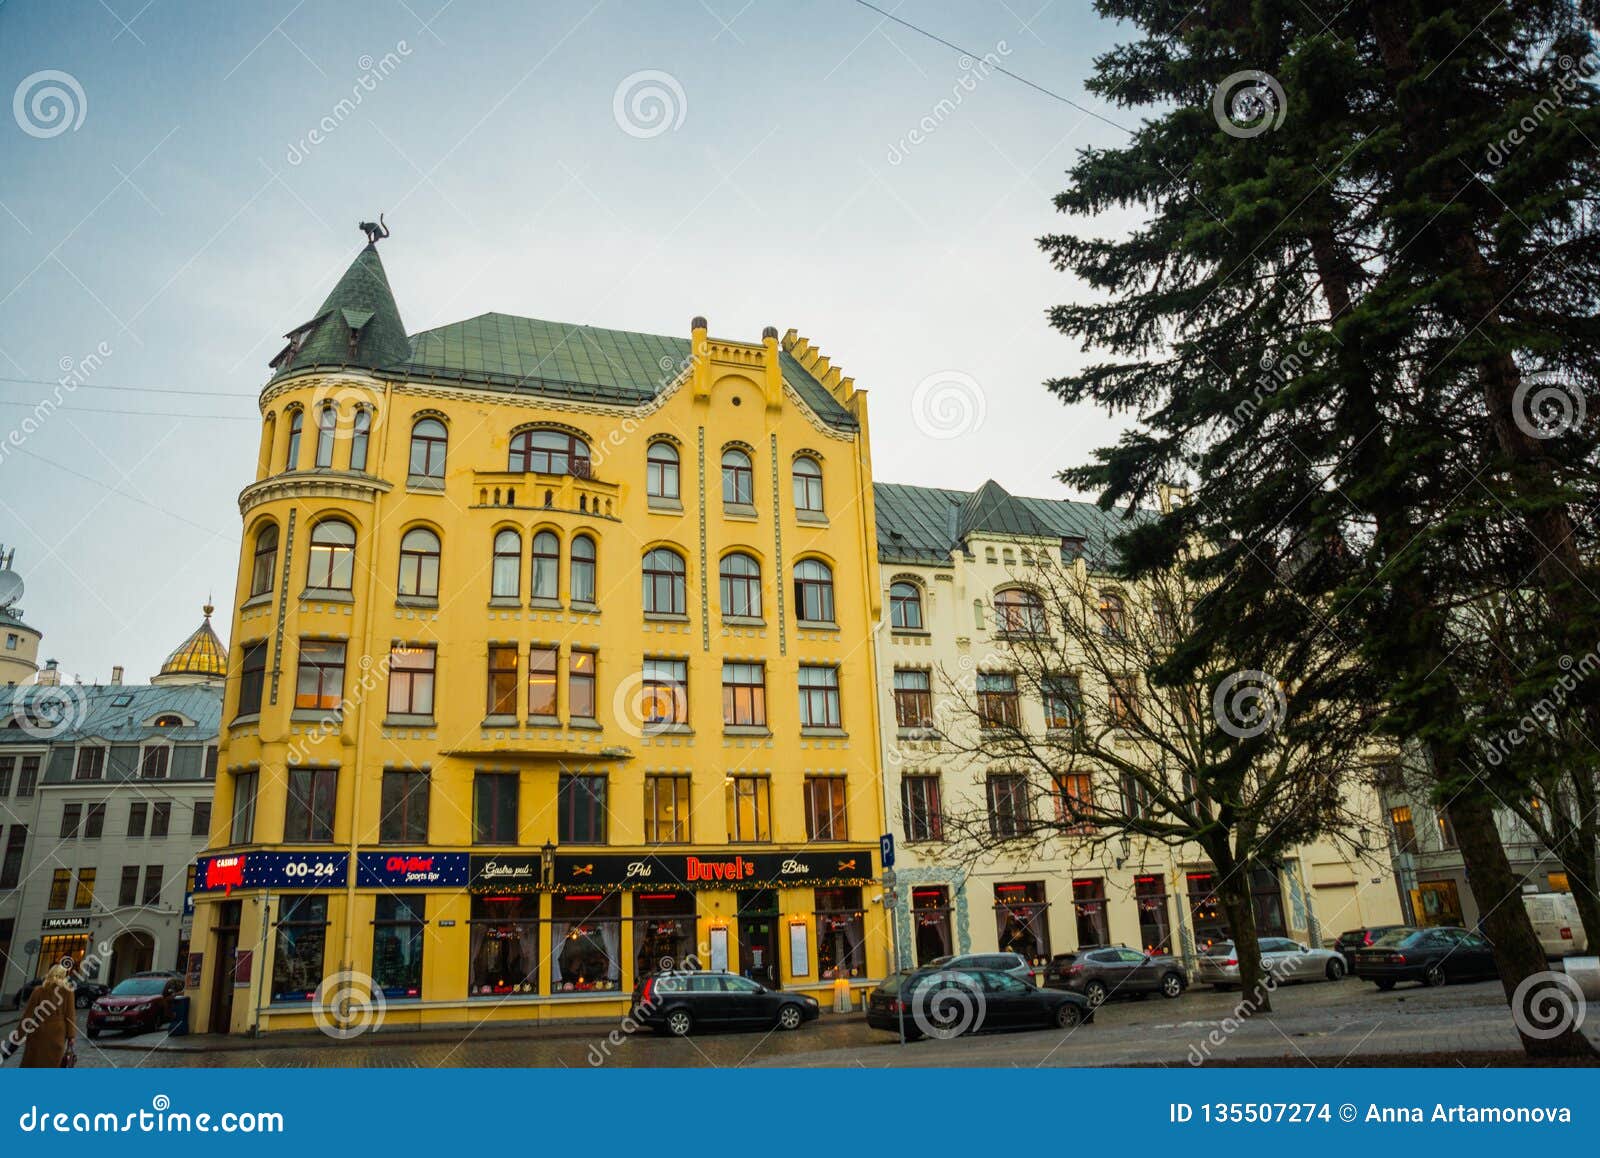 Riga Latvia The Cat House Is Styled As Medieval Architecture With Some Elements Of Art Nouveau And Located Across The House Of Editorial Stock Image Image Of House Riga